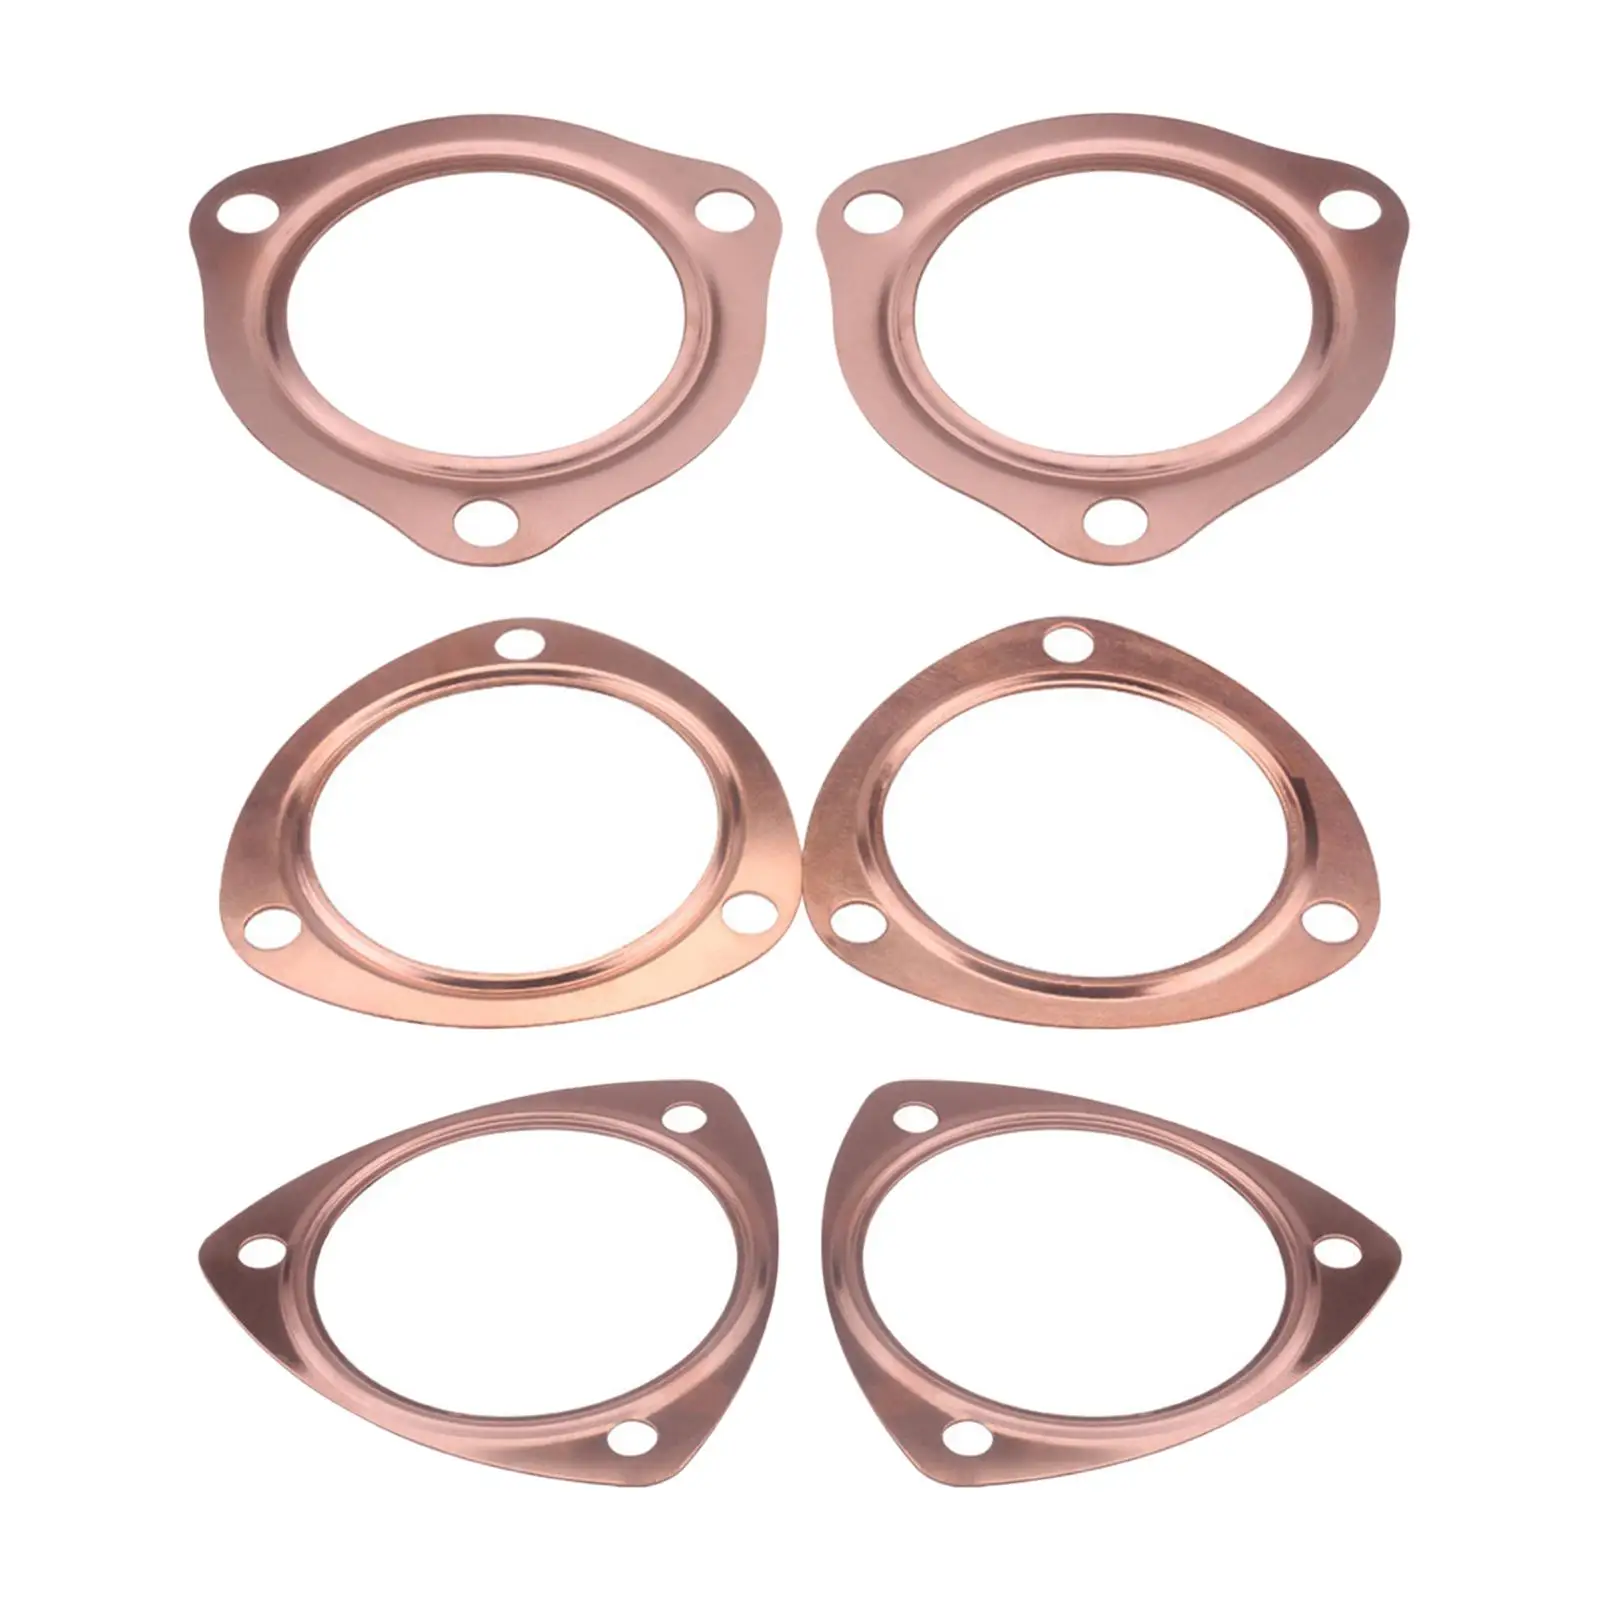 Copper Collector Gasket Wear Resisting Durable for Sbc  302 350 454